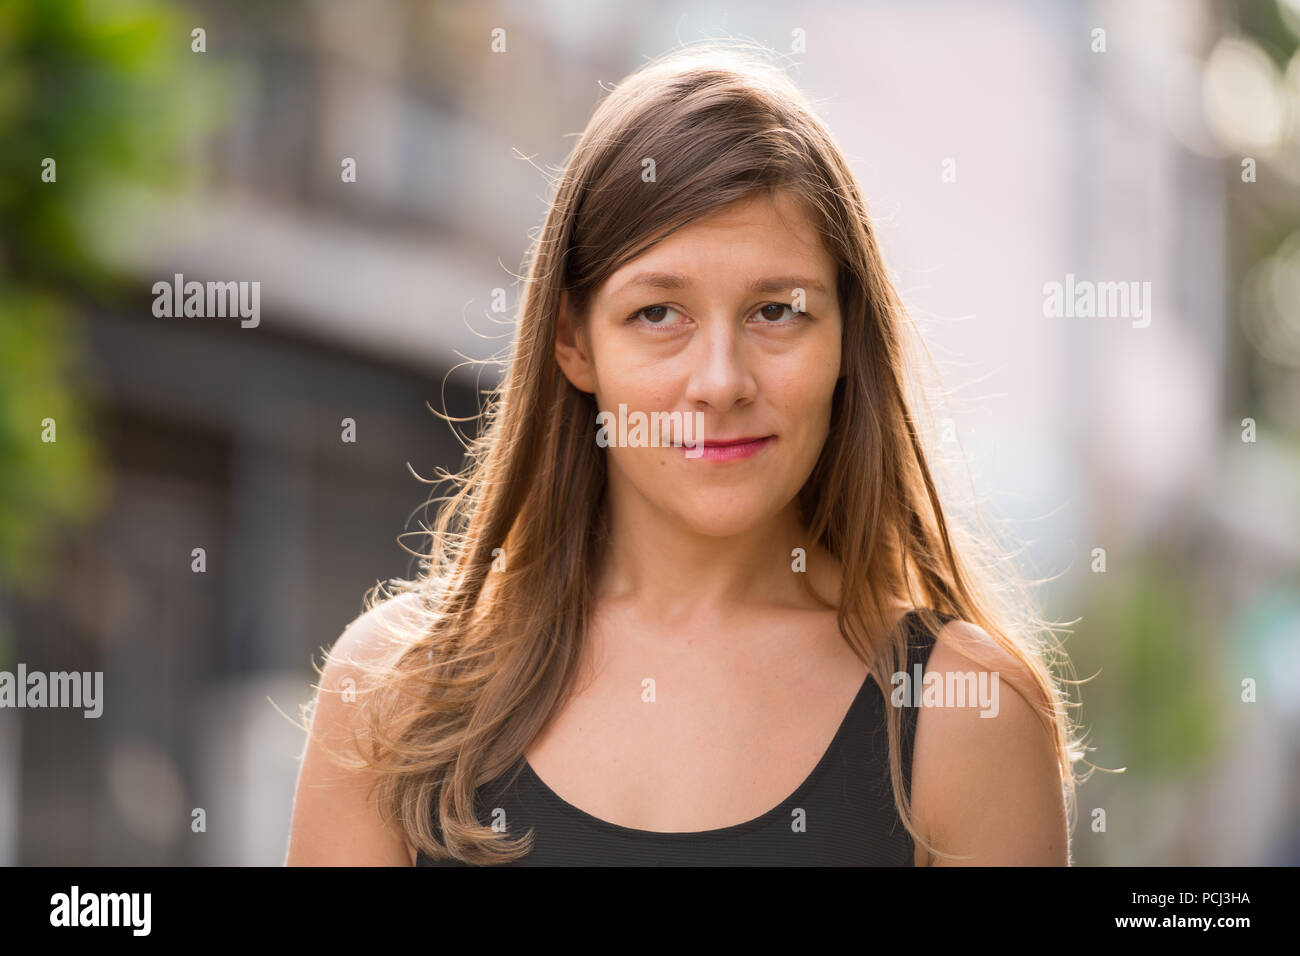 Young beautiful woman in the streets outdoors Stock Photo